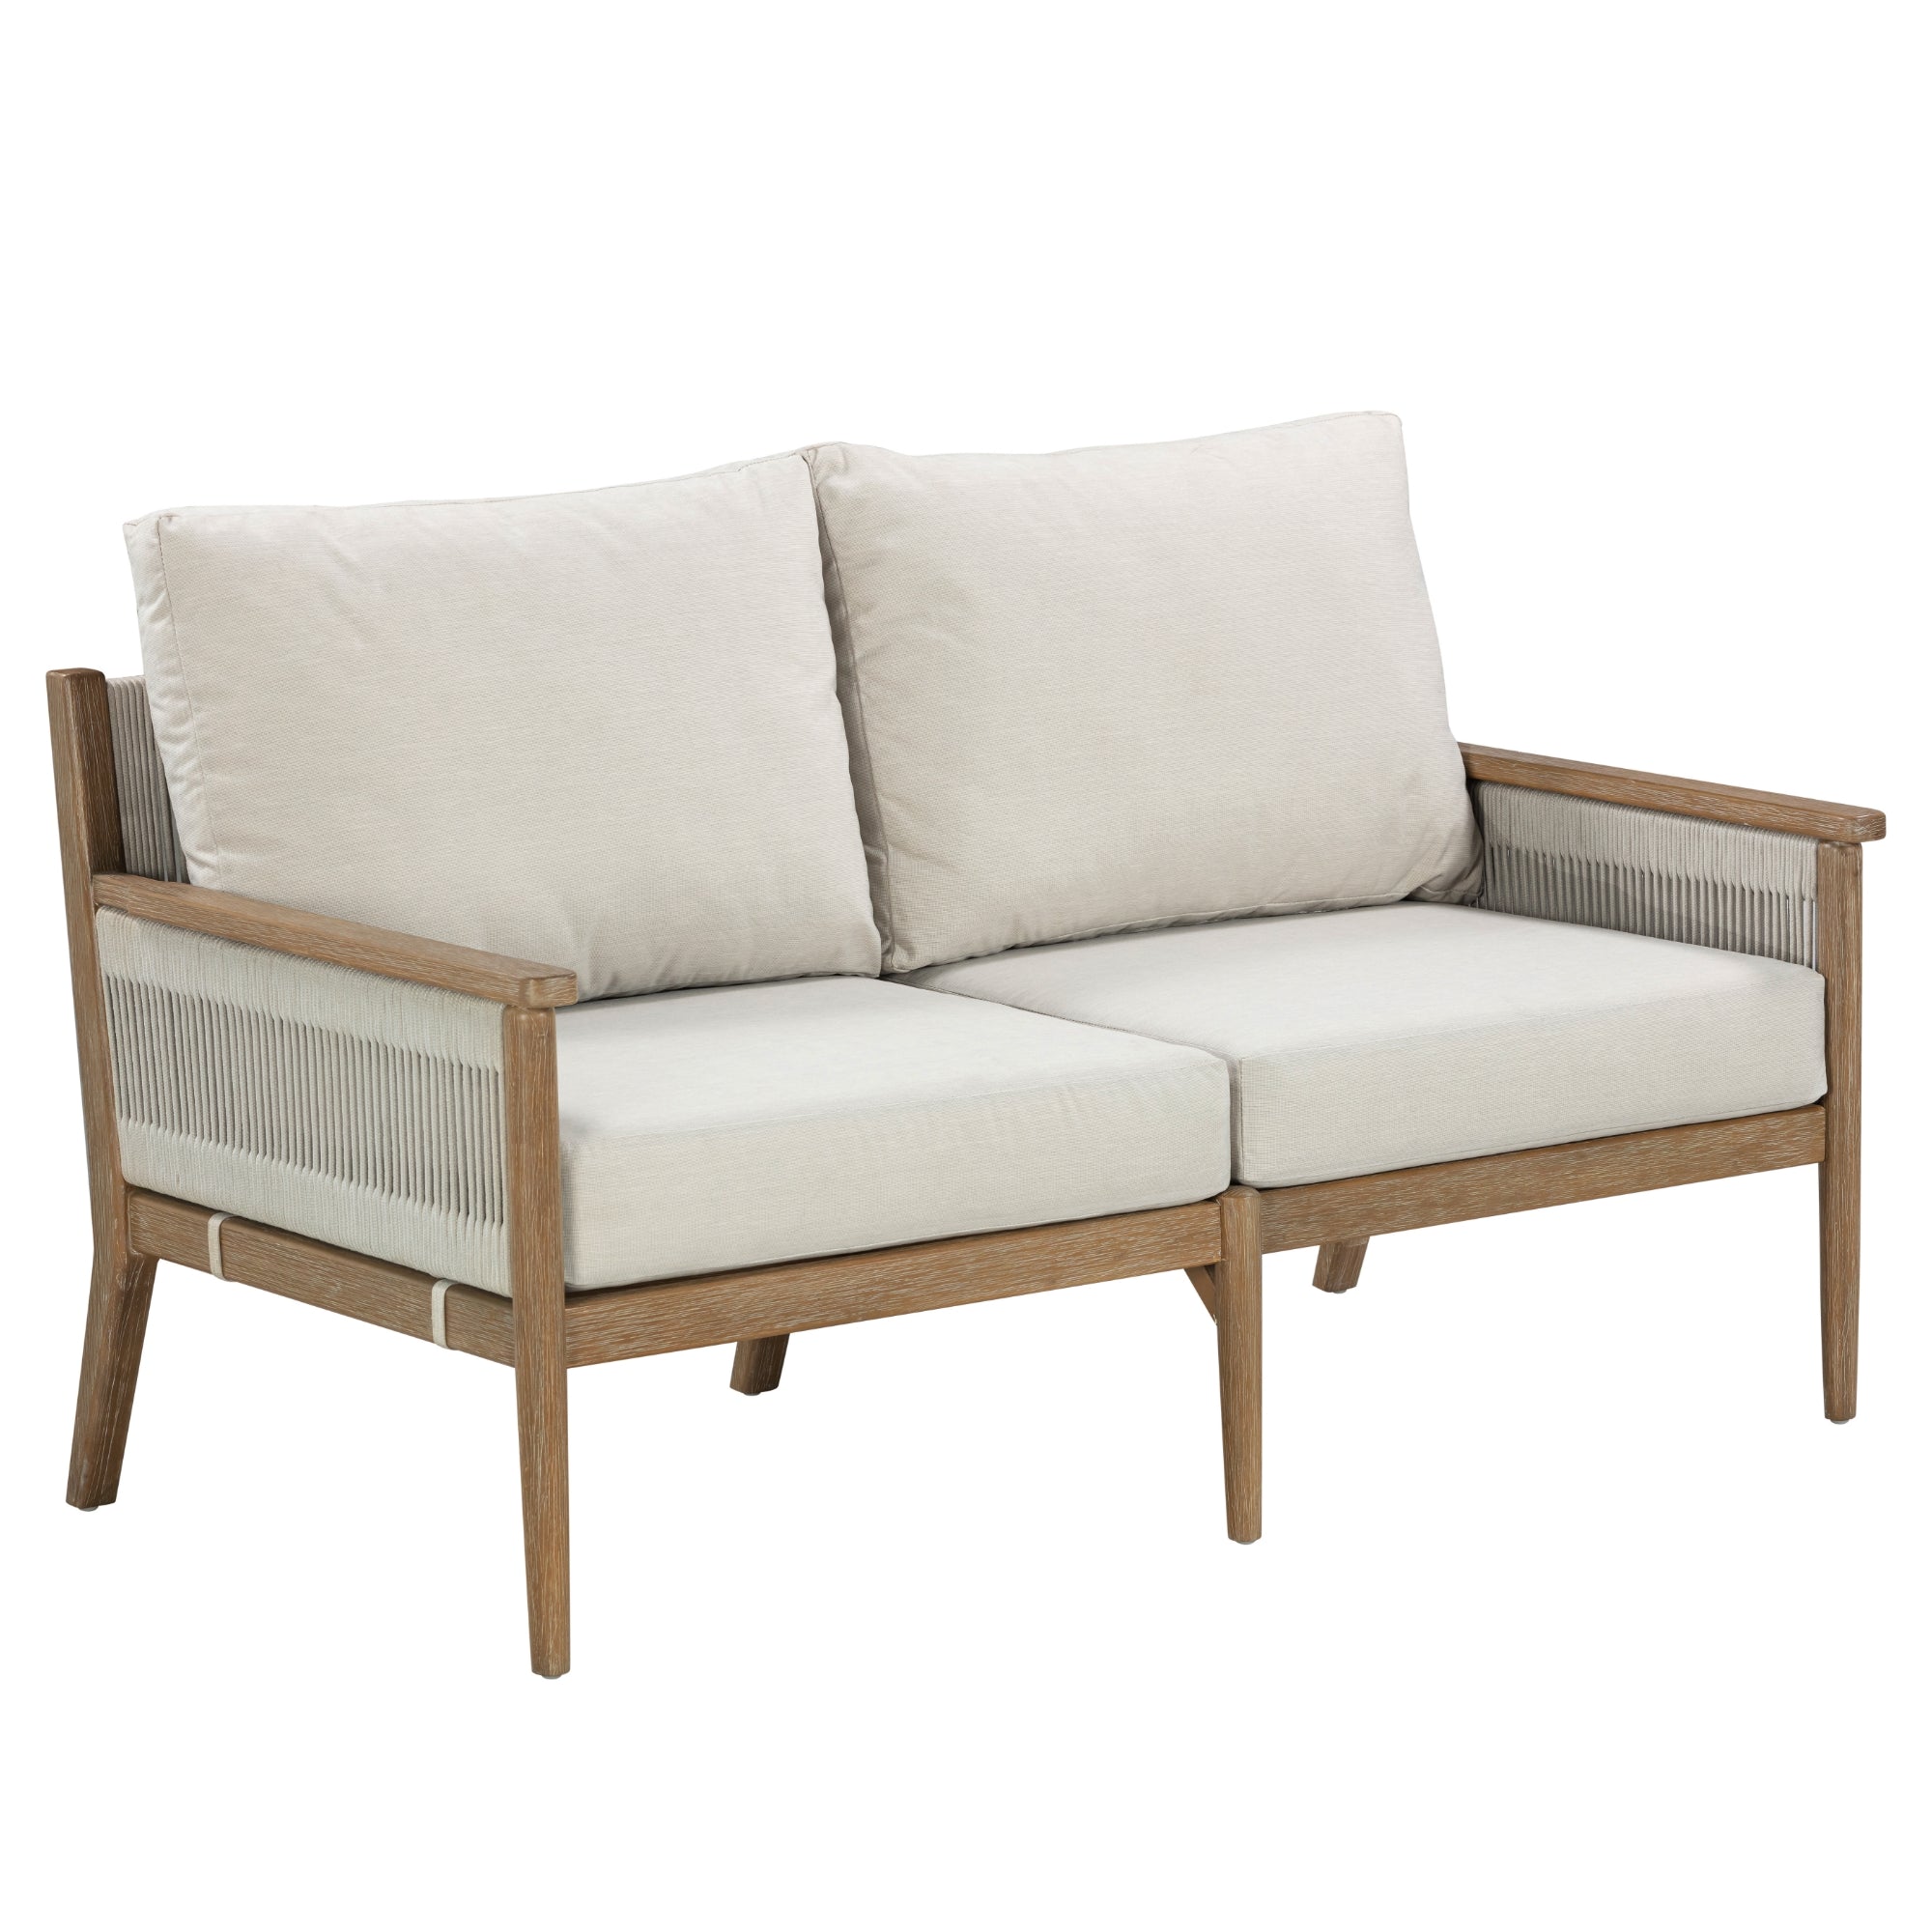 Wood & Rope Outdoor Patio Cushioned Loveseat